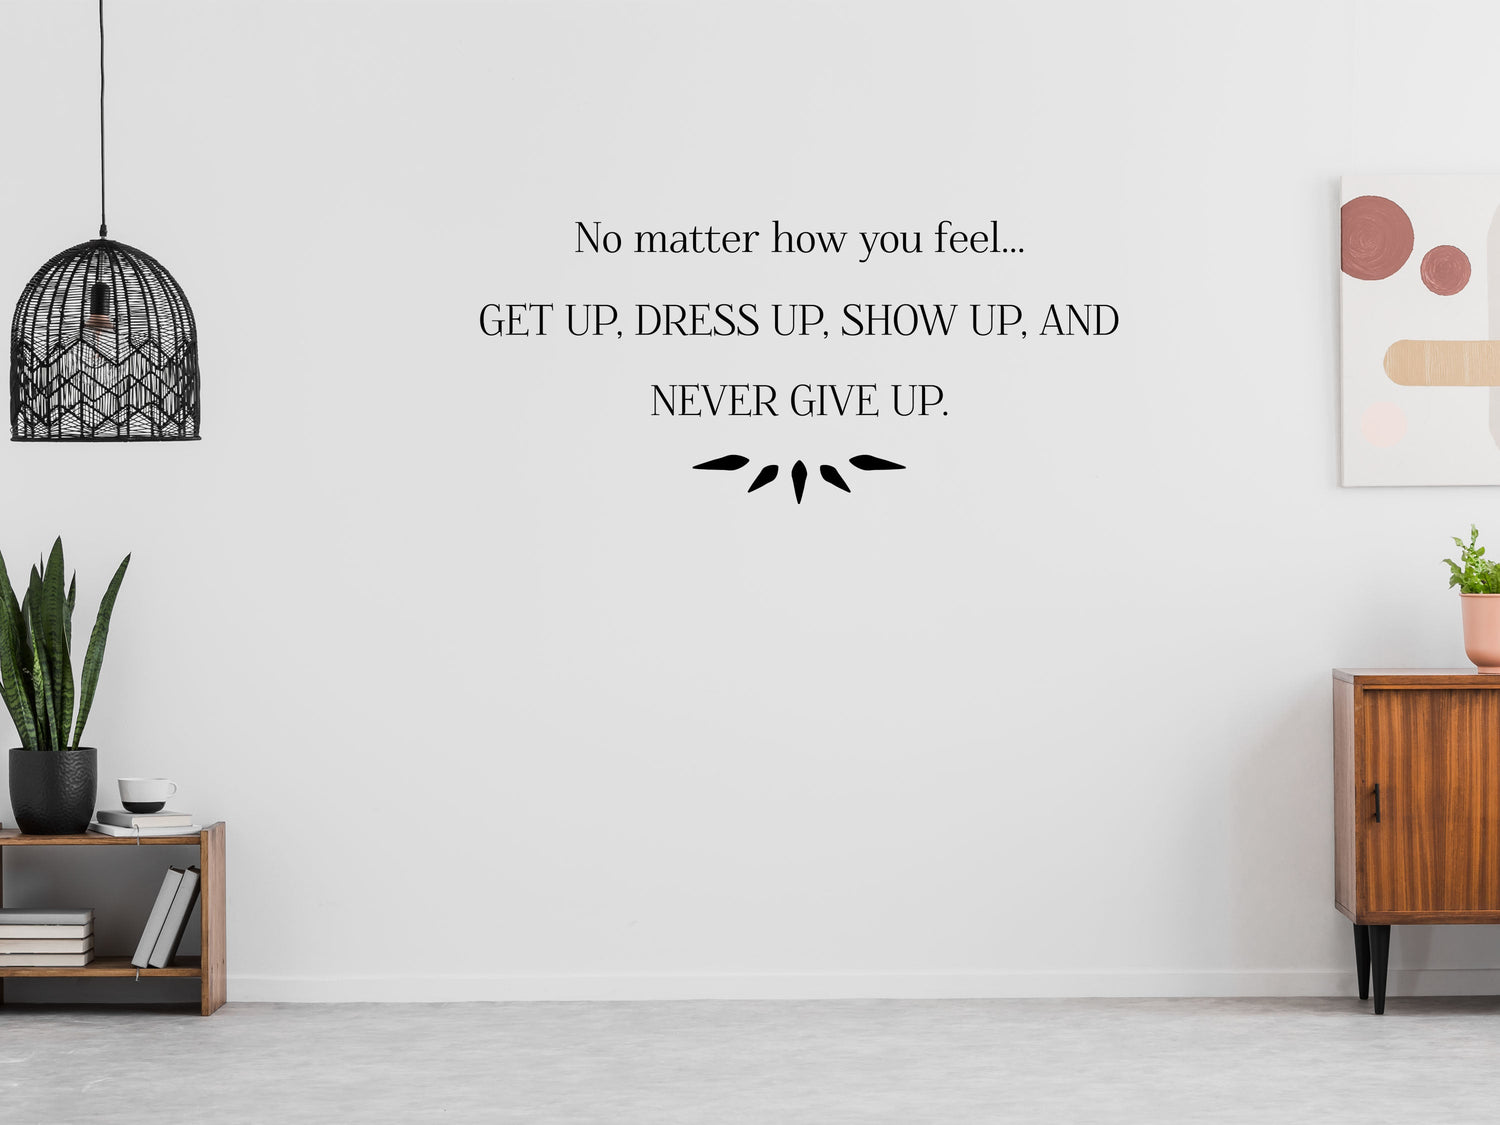 Get Up Dress Up and Show Up Office Wall Quote Sticker- Inspirational Wall Decals Vinyl Wall Decal Inspirational Wall Signs 